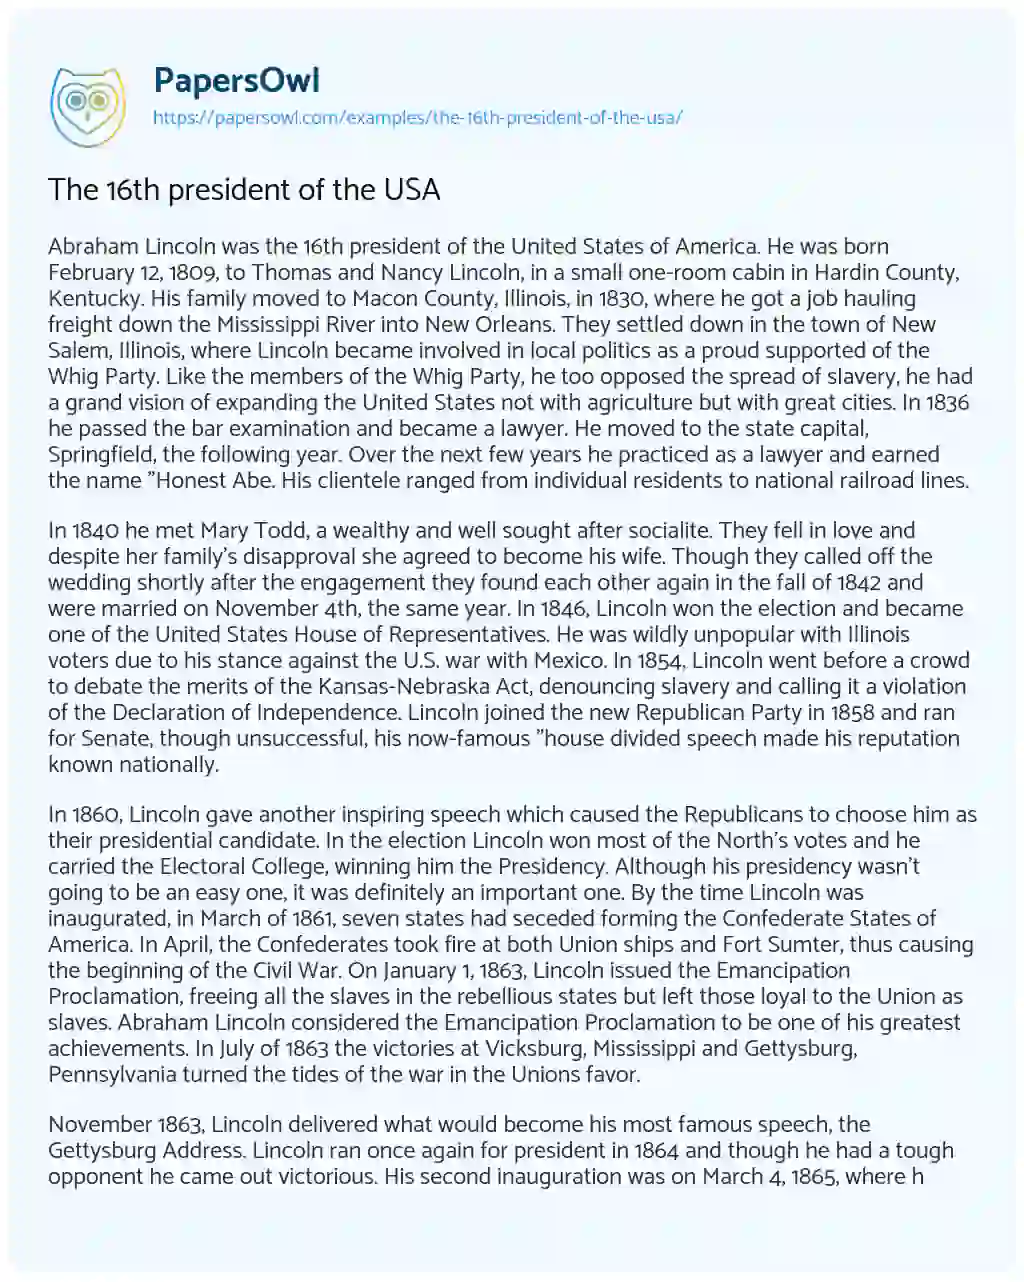 Essay on The 16th President of the USA